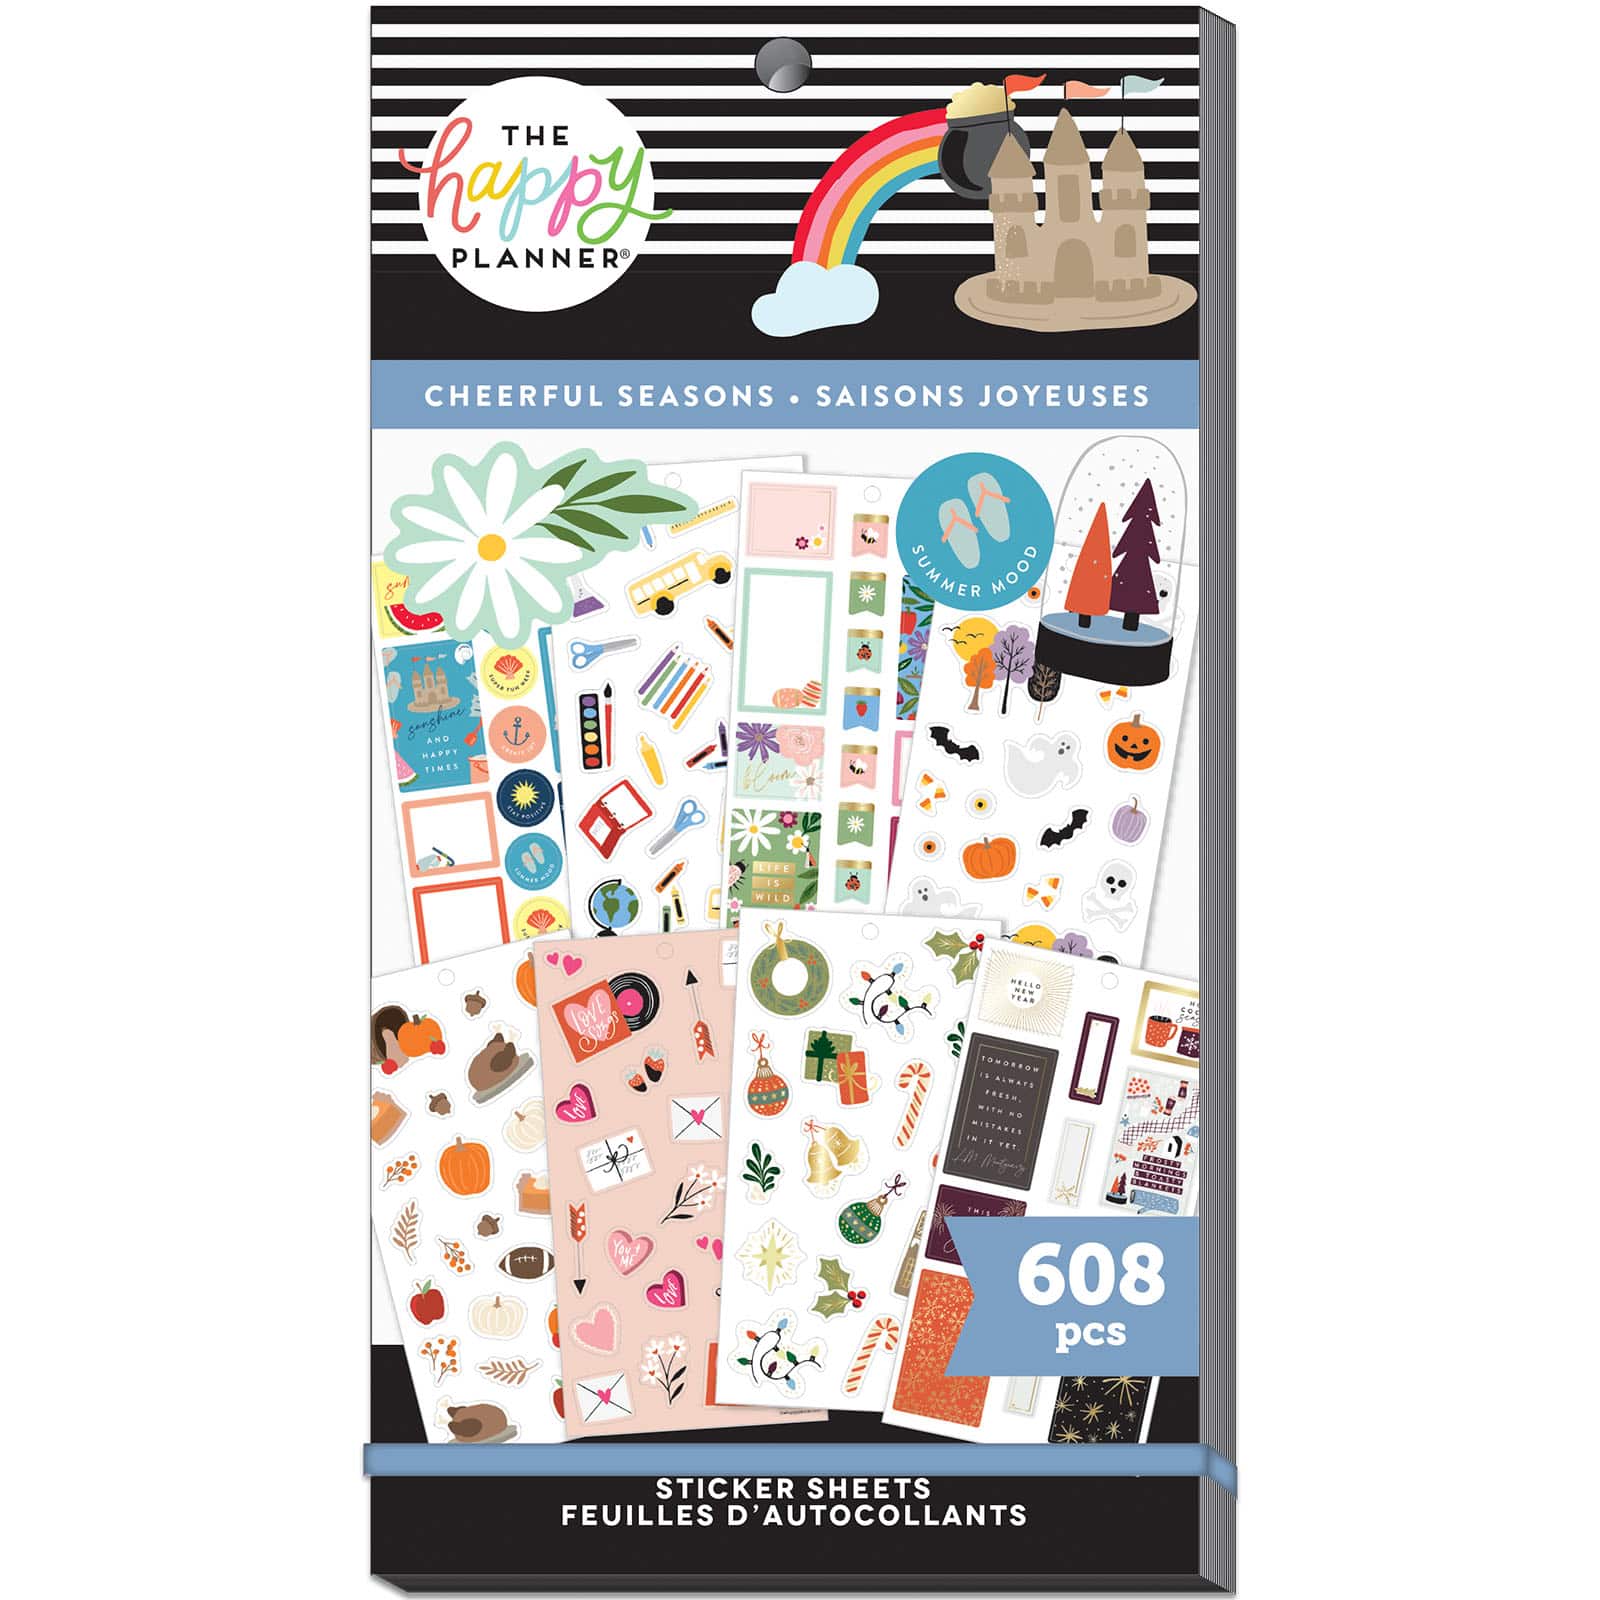 Custom Planner Stickers for Adults - Personalized Calendar Stickers for  Organization, School, Work, Productivity (120 Stickers)